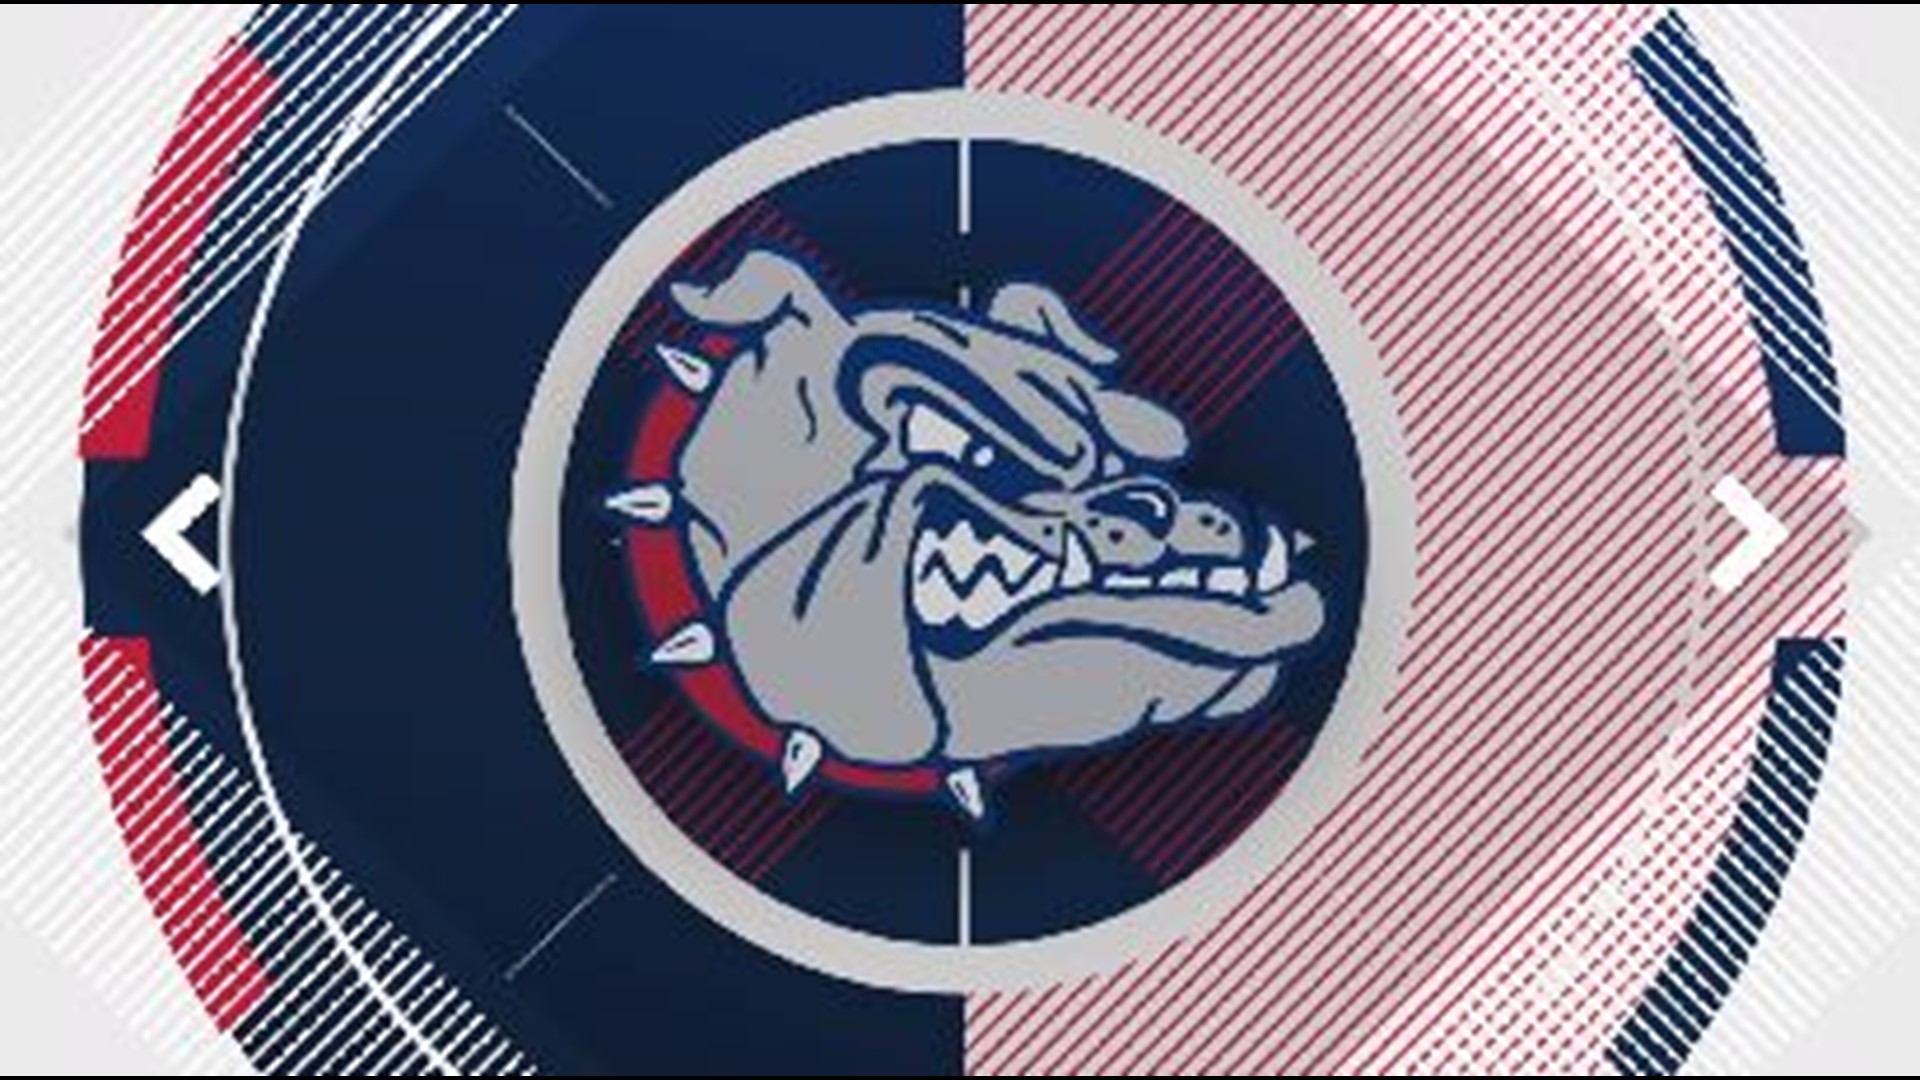 Gonzaga rallied from a 20-point second-quarter deficit to win.